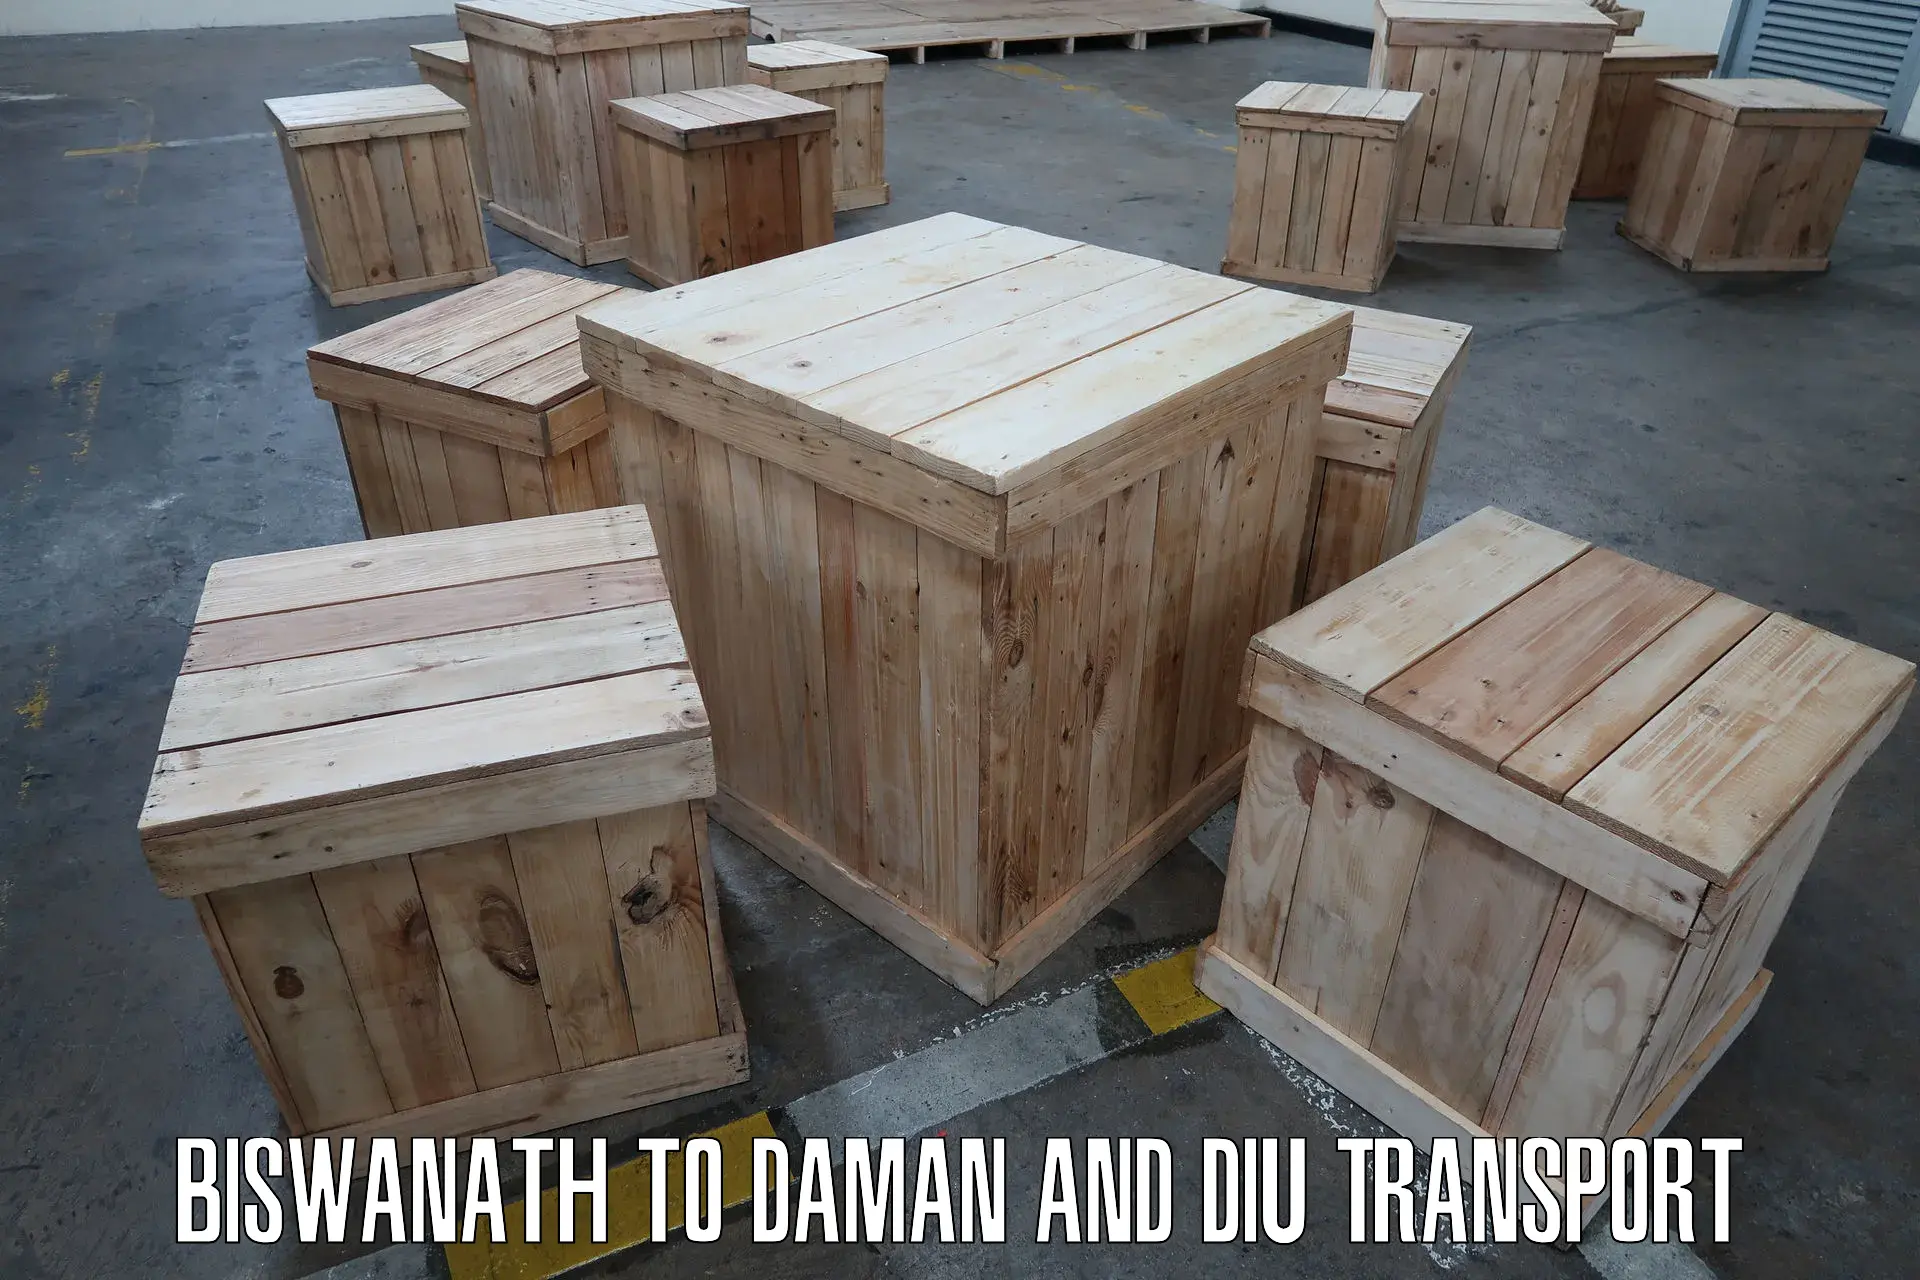 Delivery service Biswanath to Daman and Diu